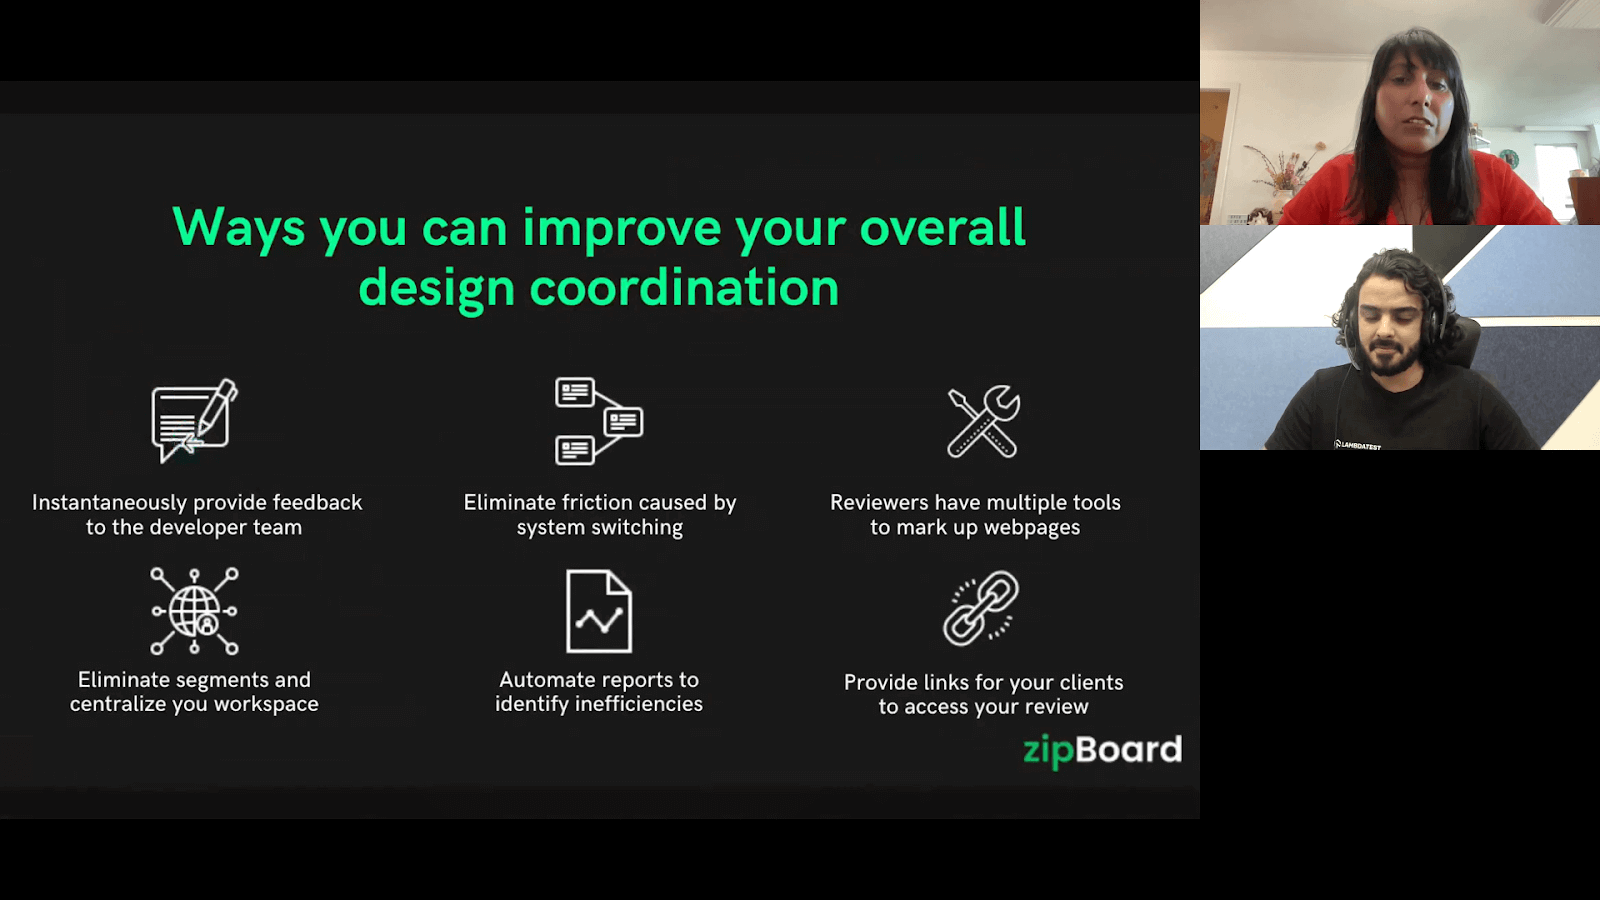 Ways to Improve Your Overall Design Coordination